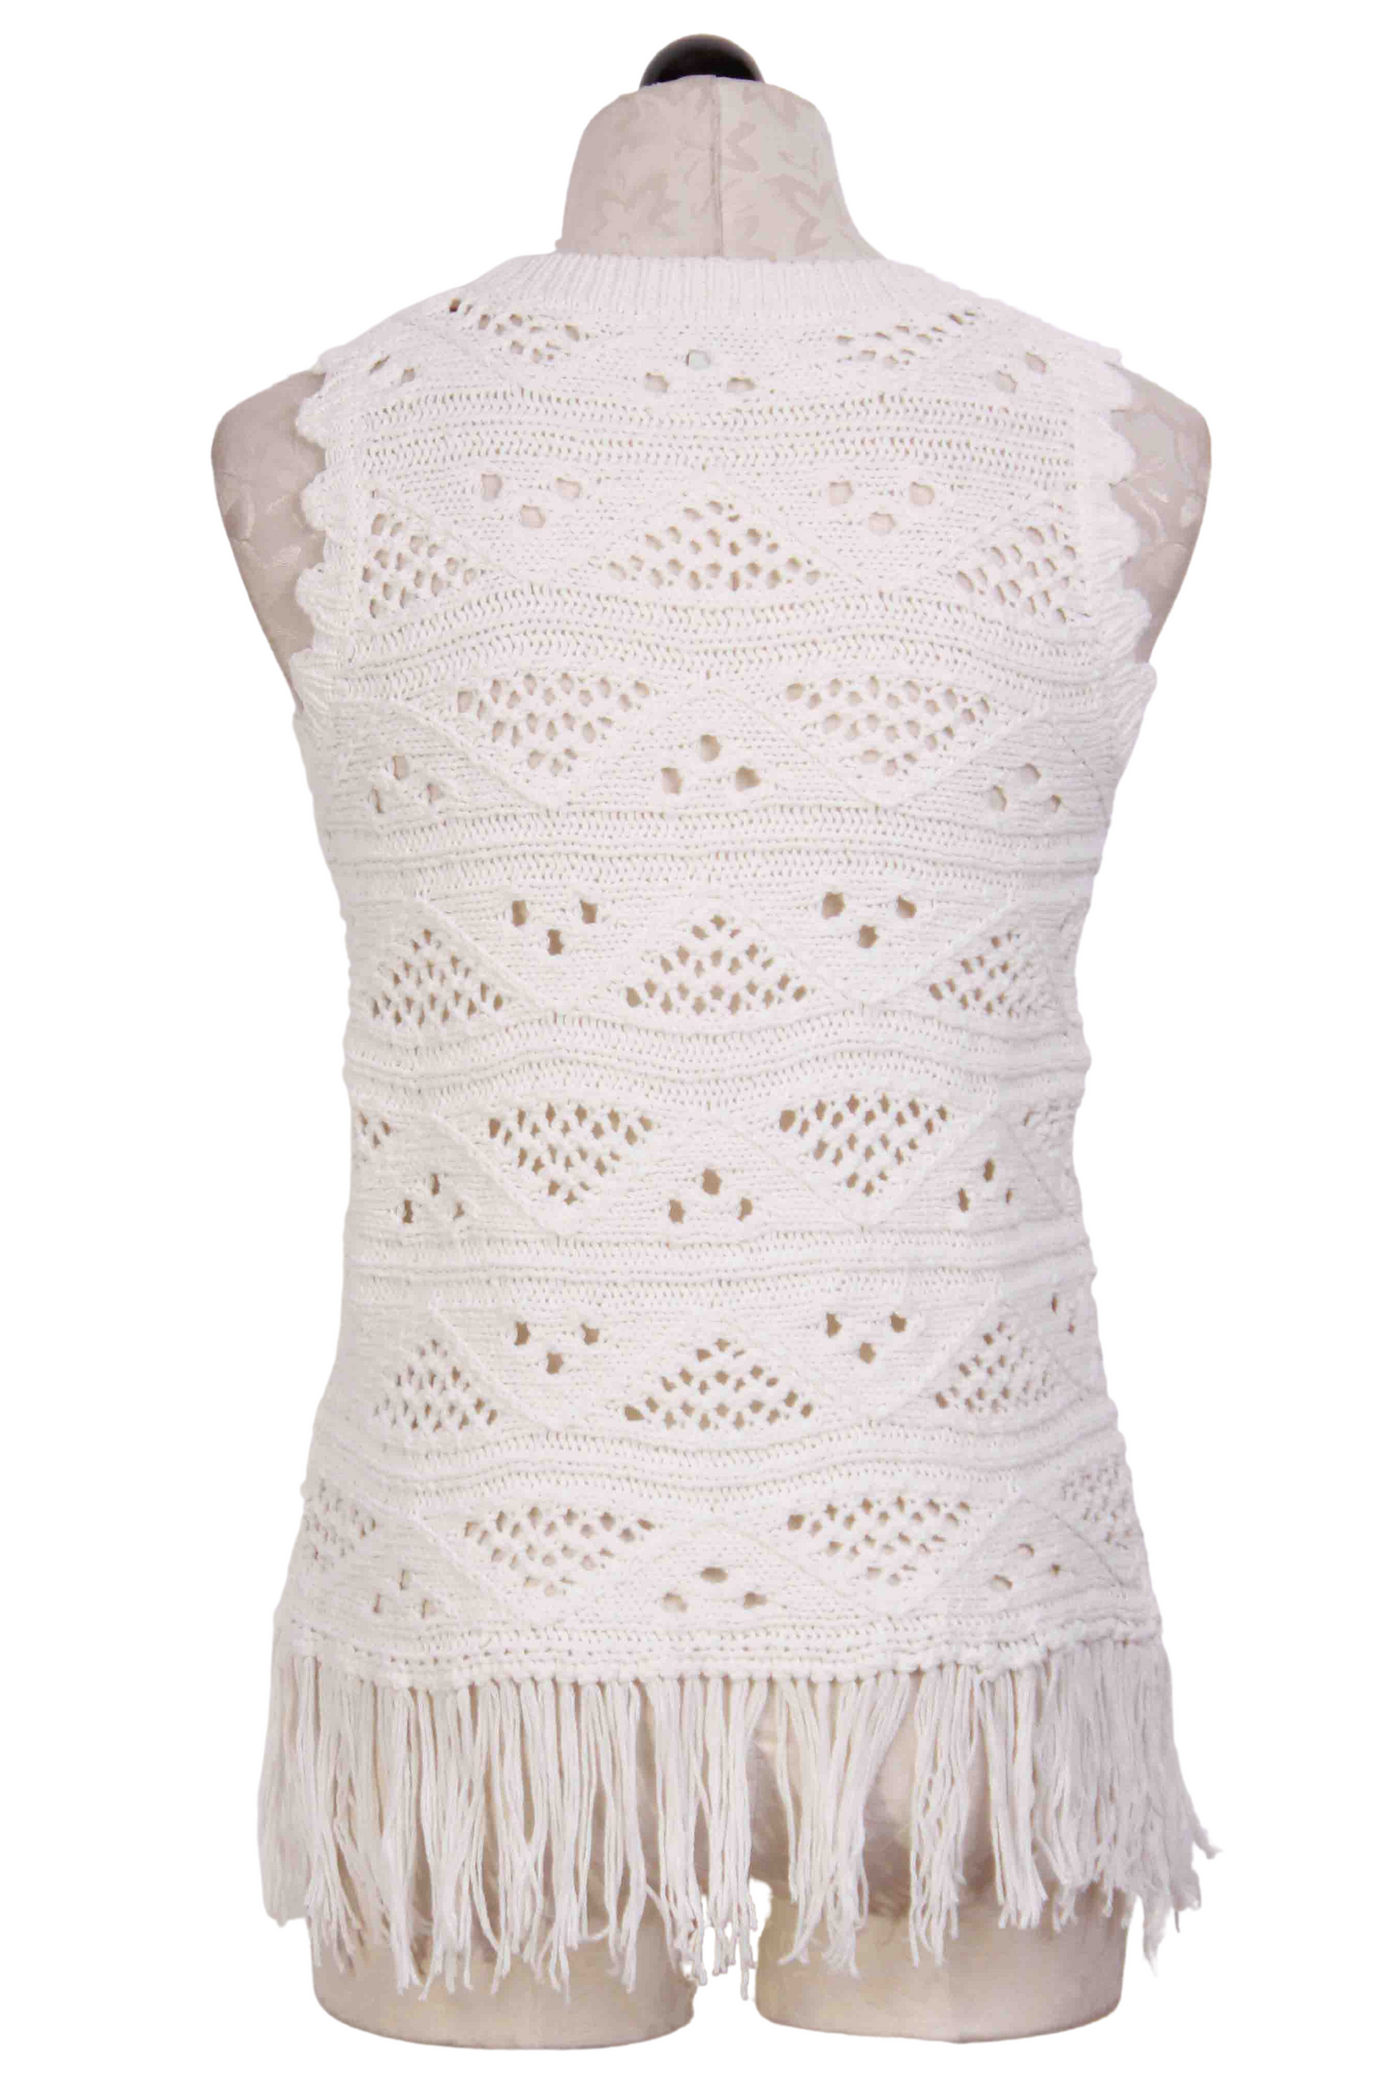 back view of Off White Bodhi Fringed Crocheted Vest by Another Love